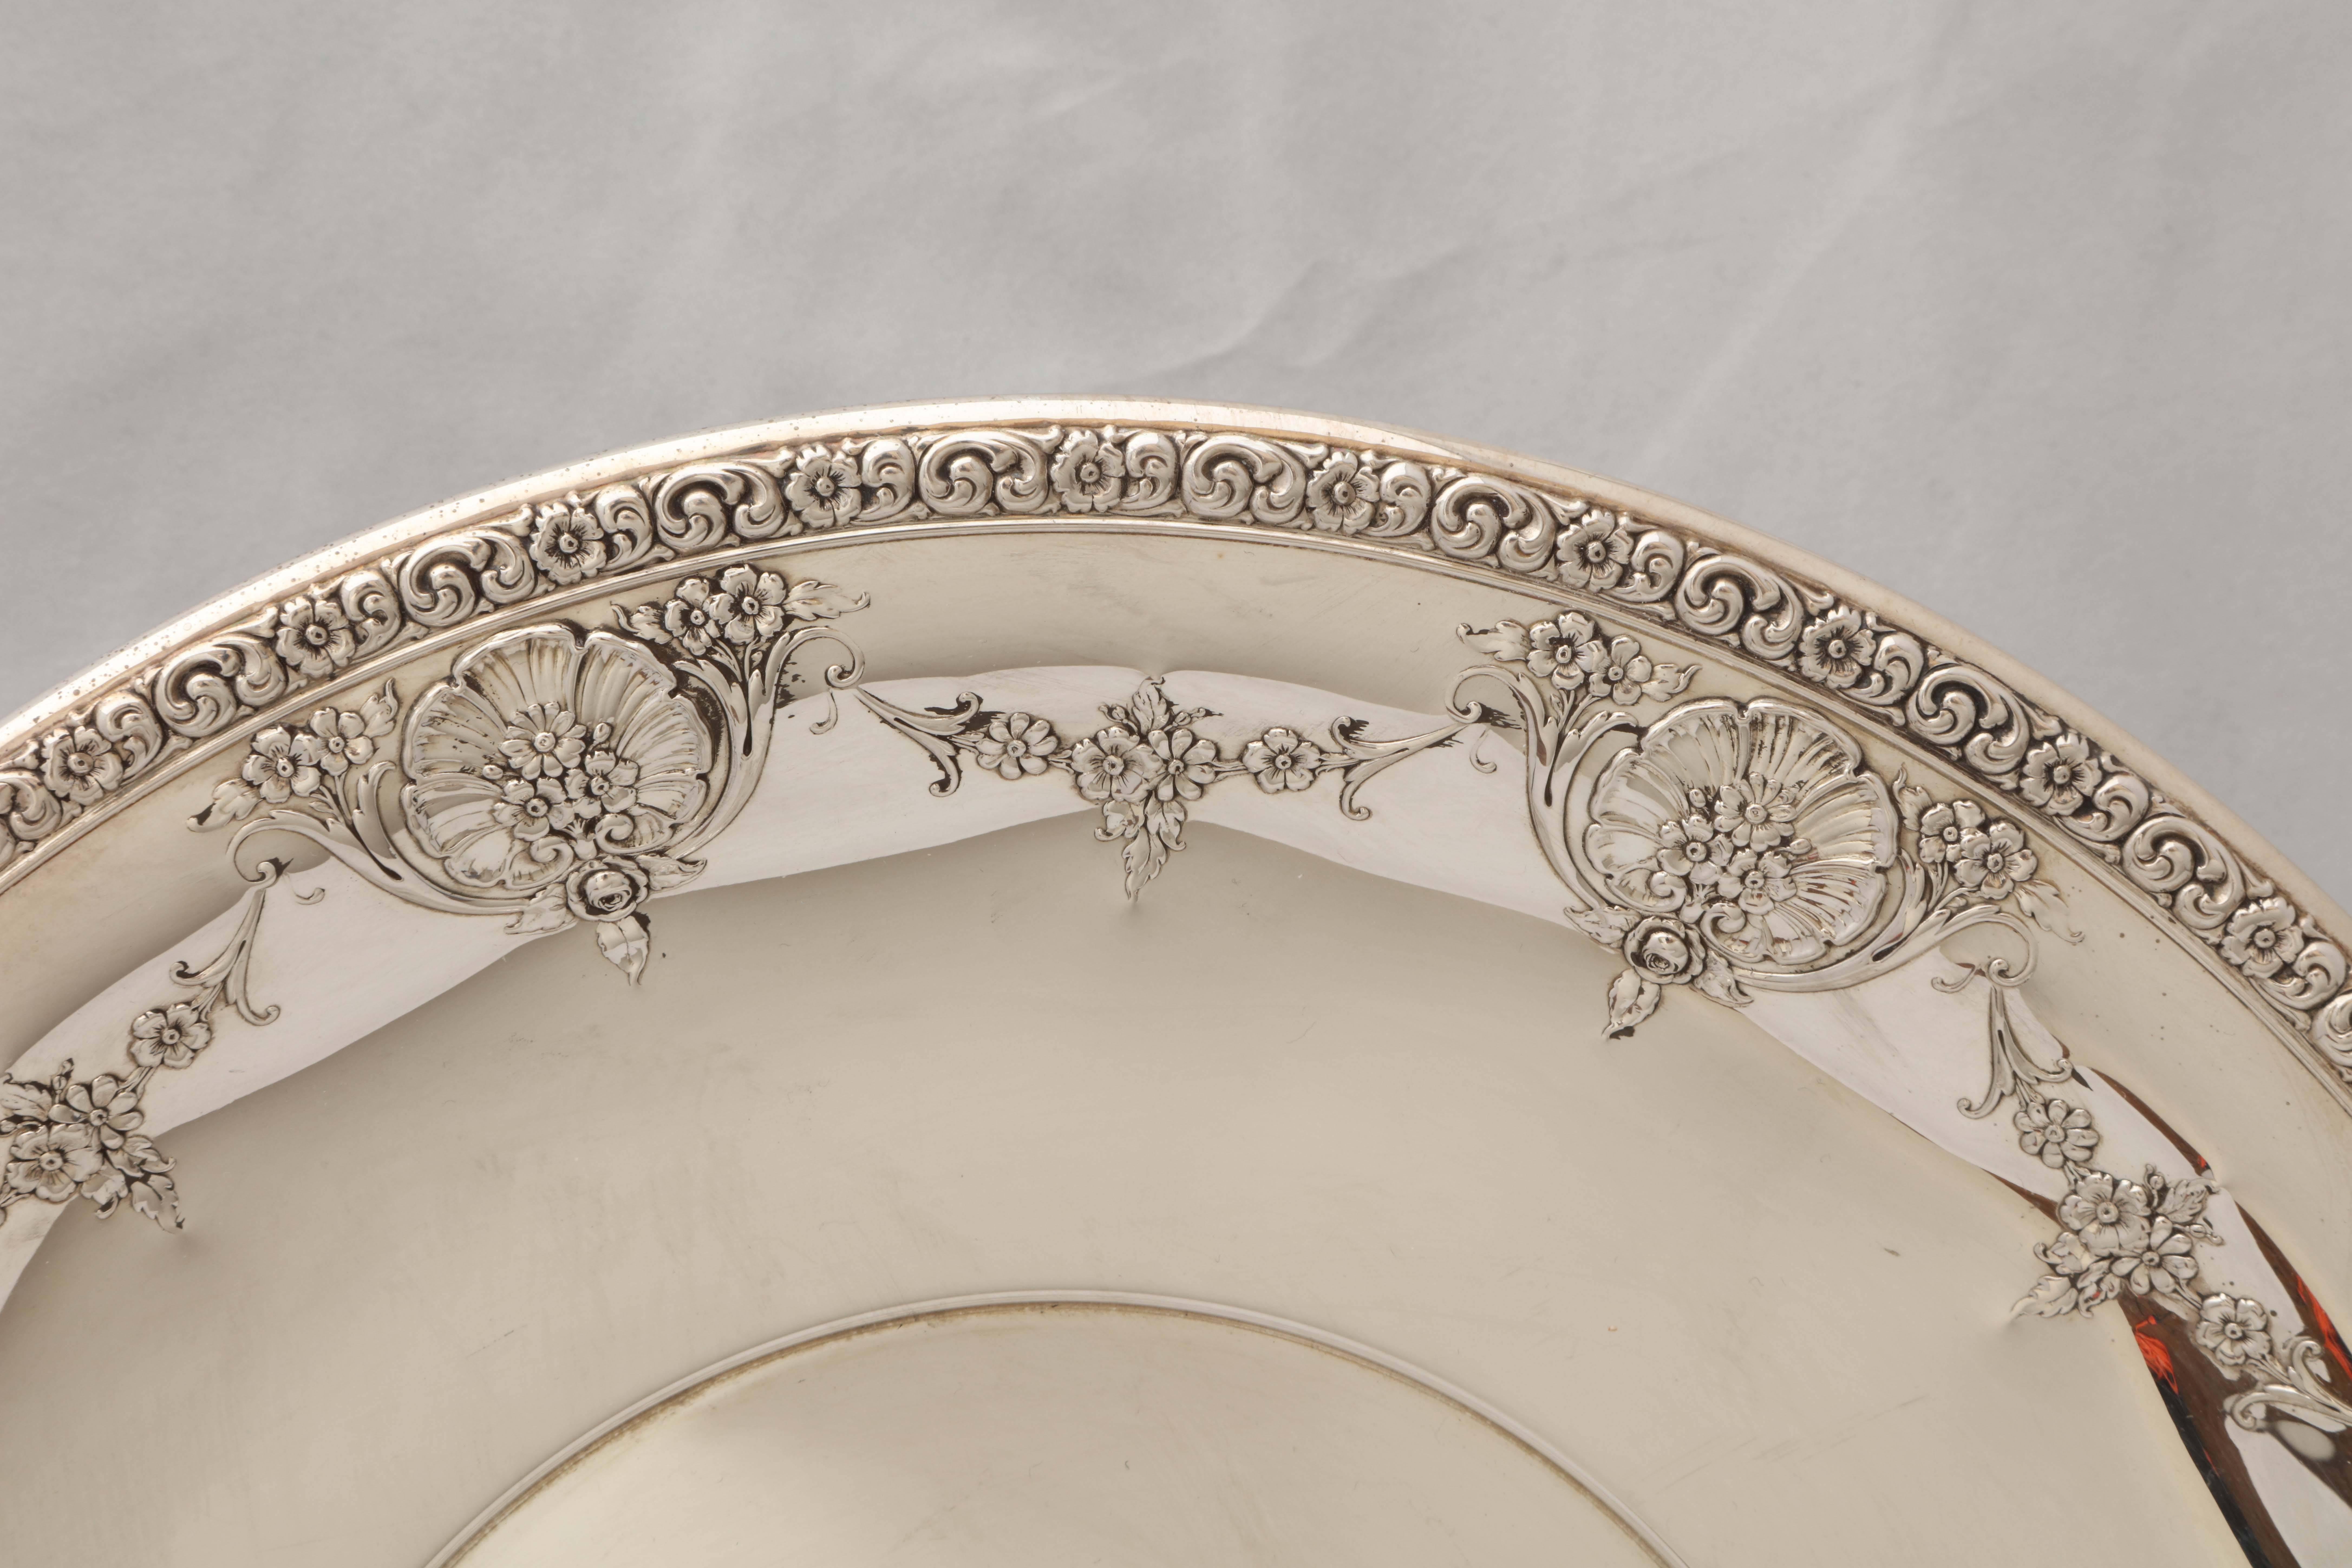 American Sterling Silver Victorian-Style Serving Platter